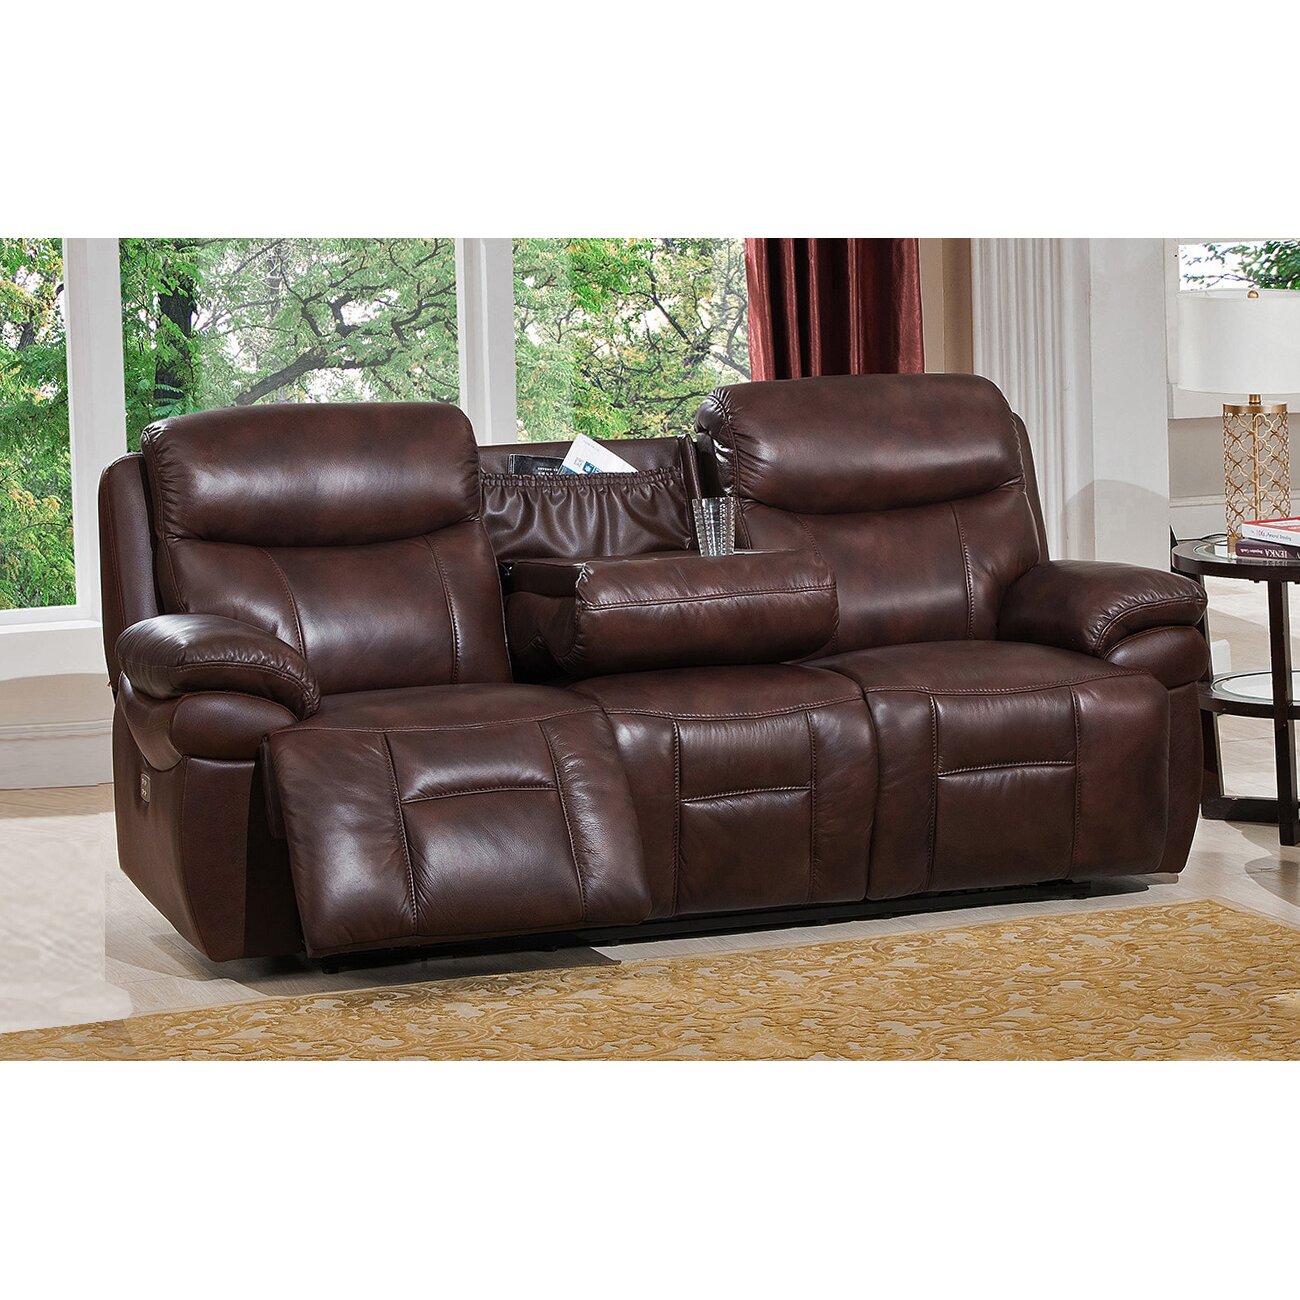 Amax Sanford 3 Piece Leather Power Reclining Living Room Set with USB ...